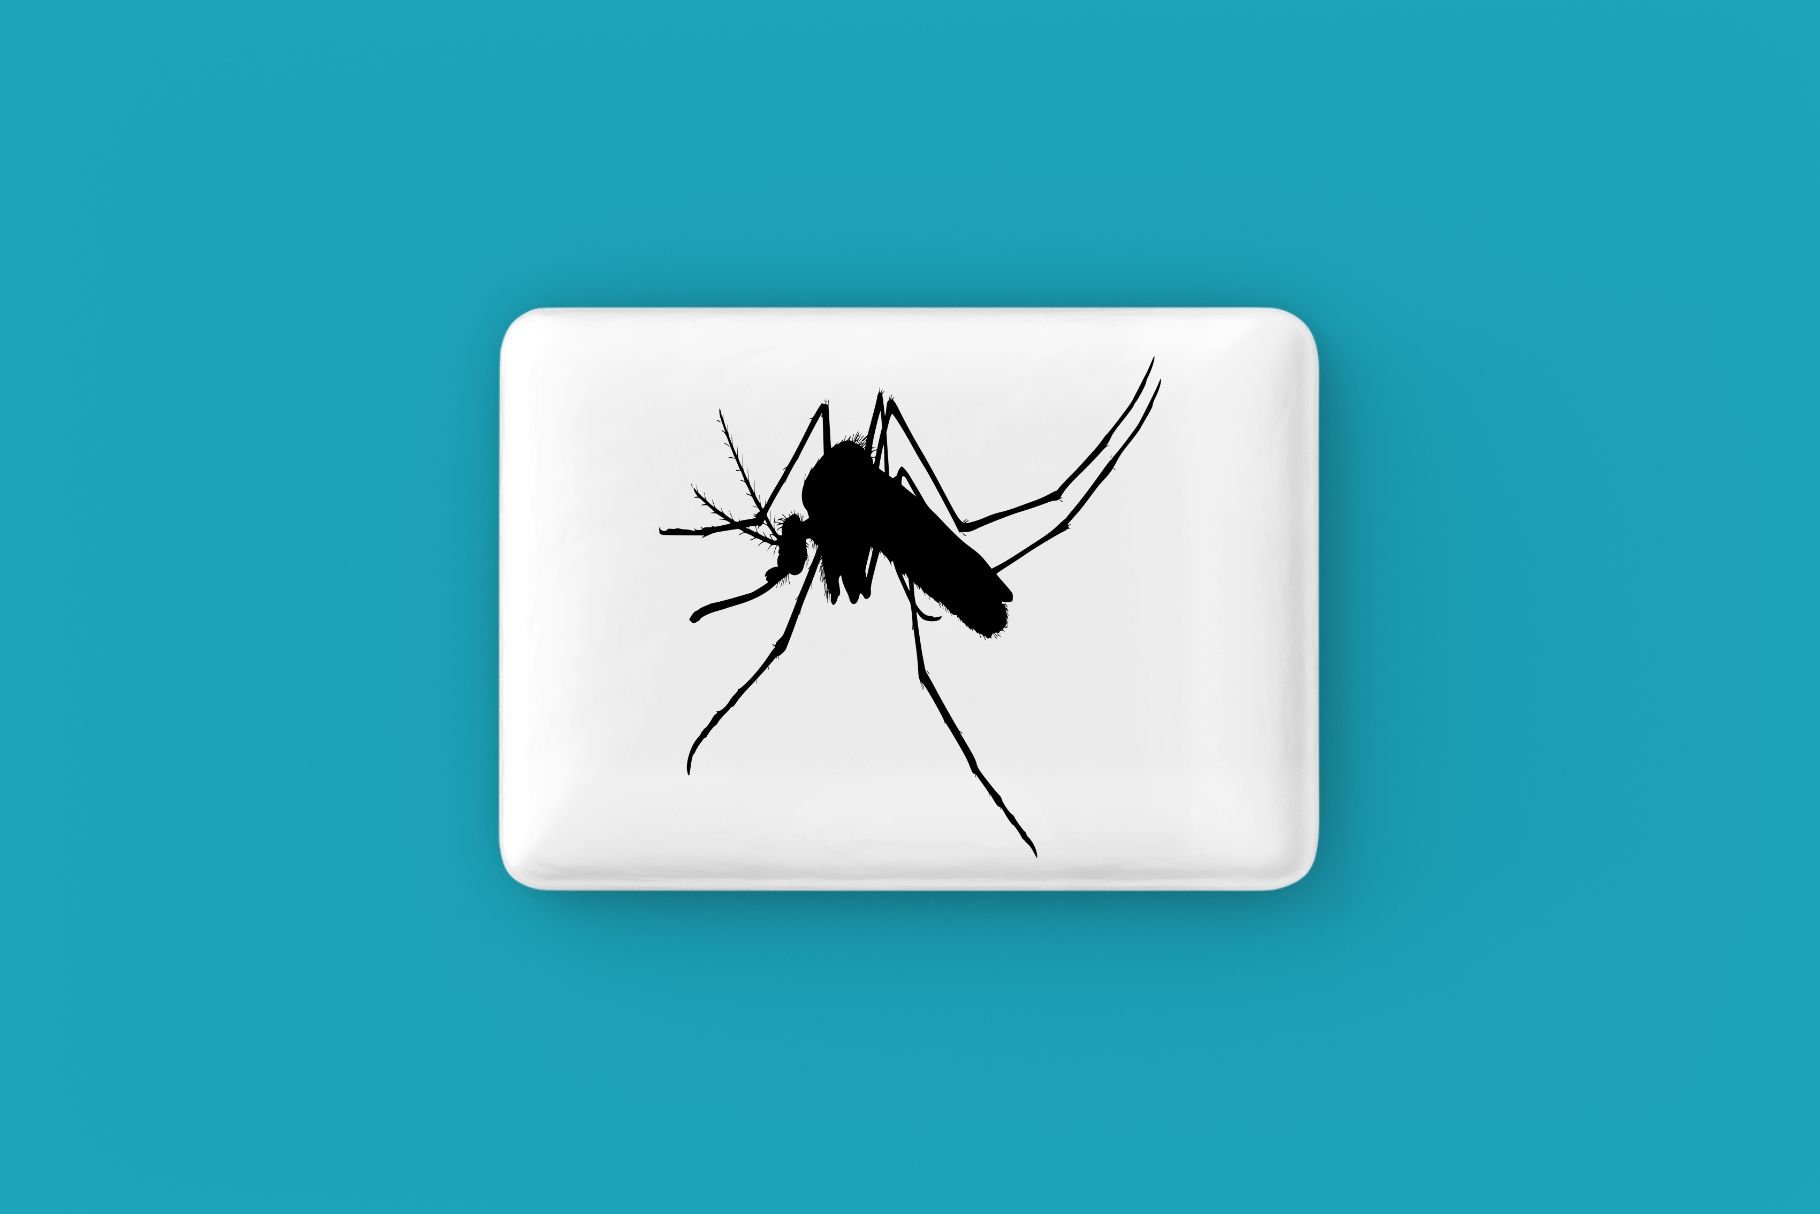 Mosquito Silhouette preview image.